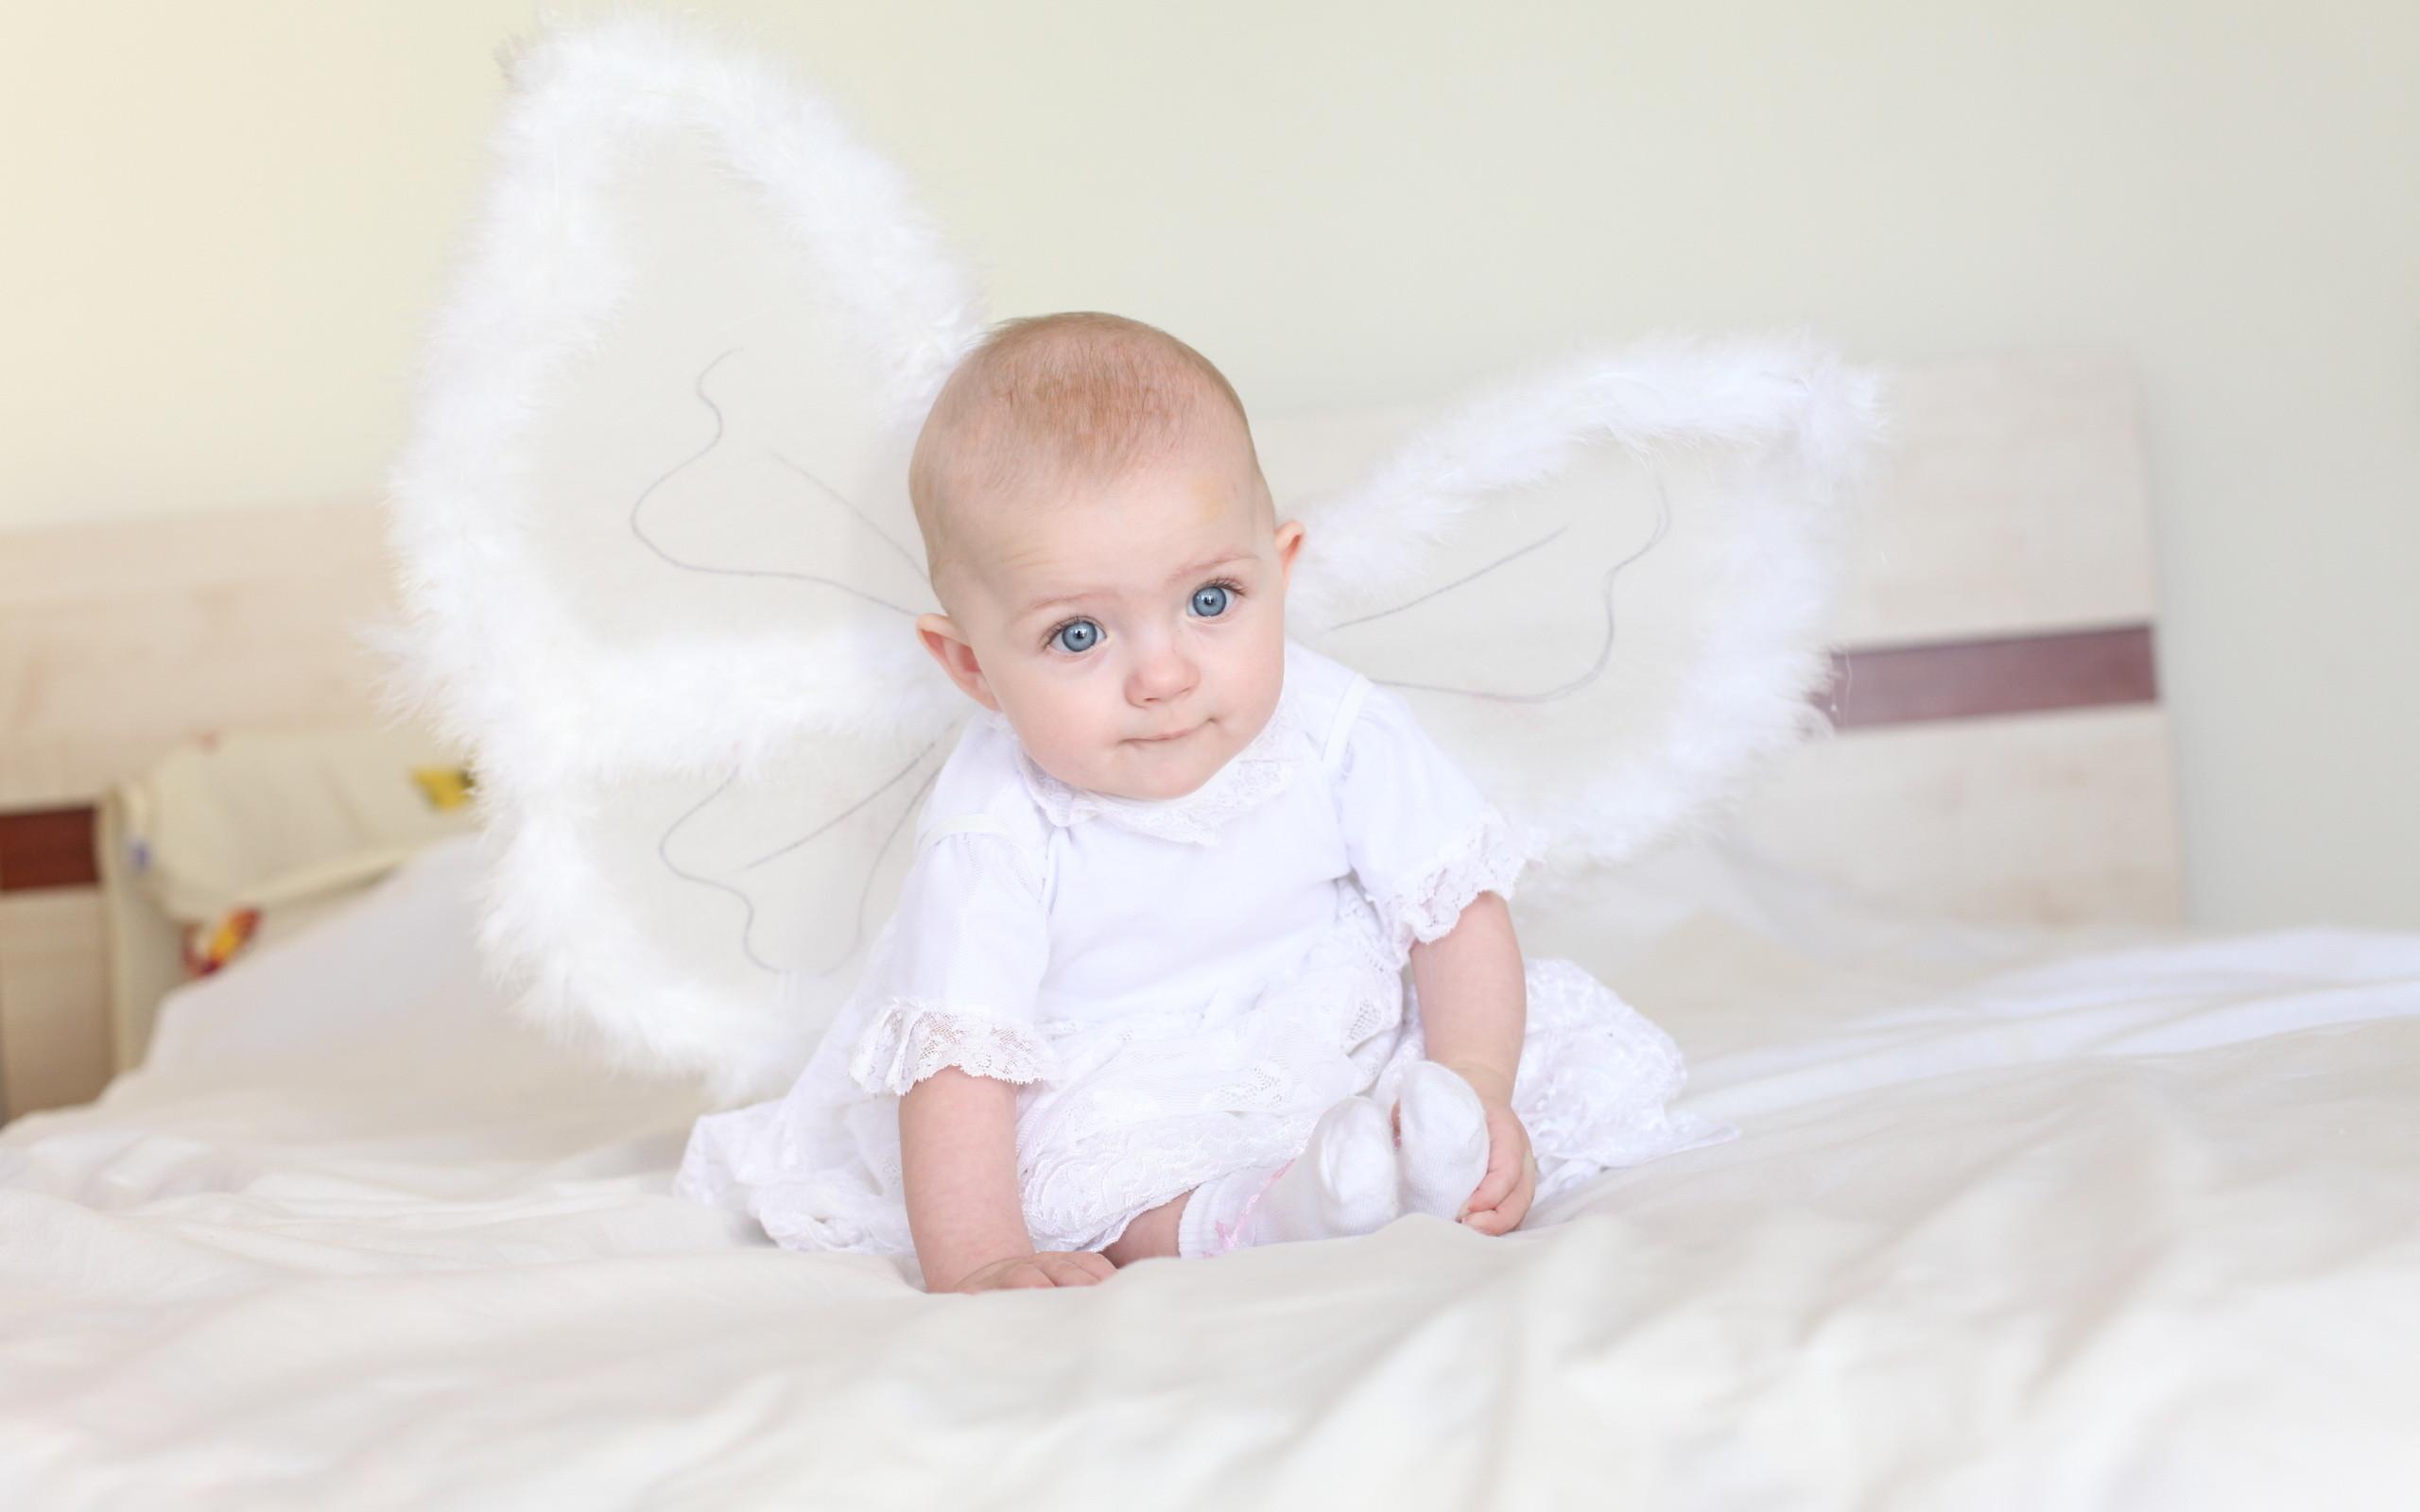 baby angels wallpapers for facebook